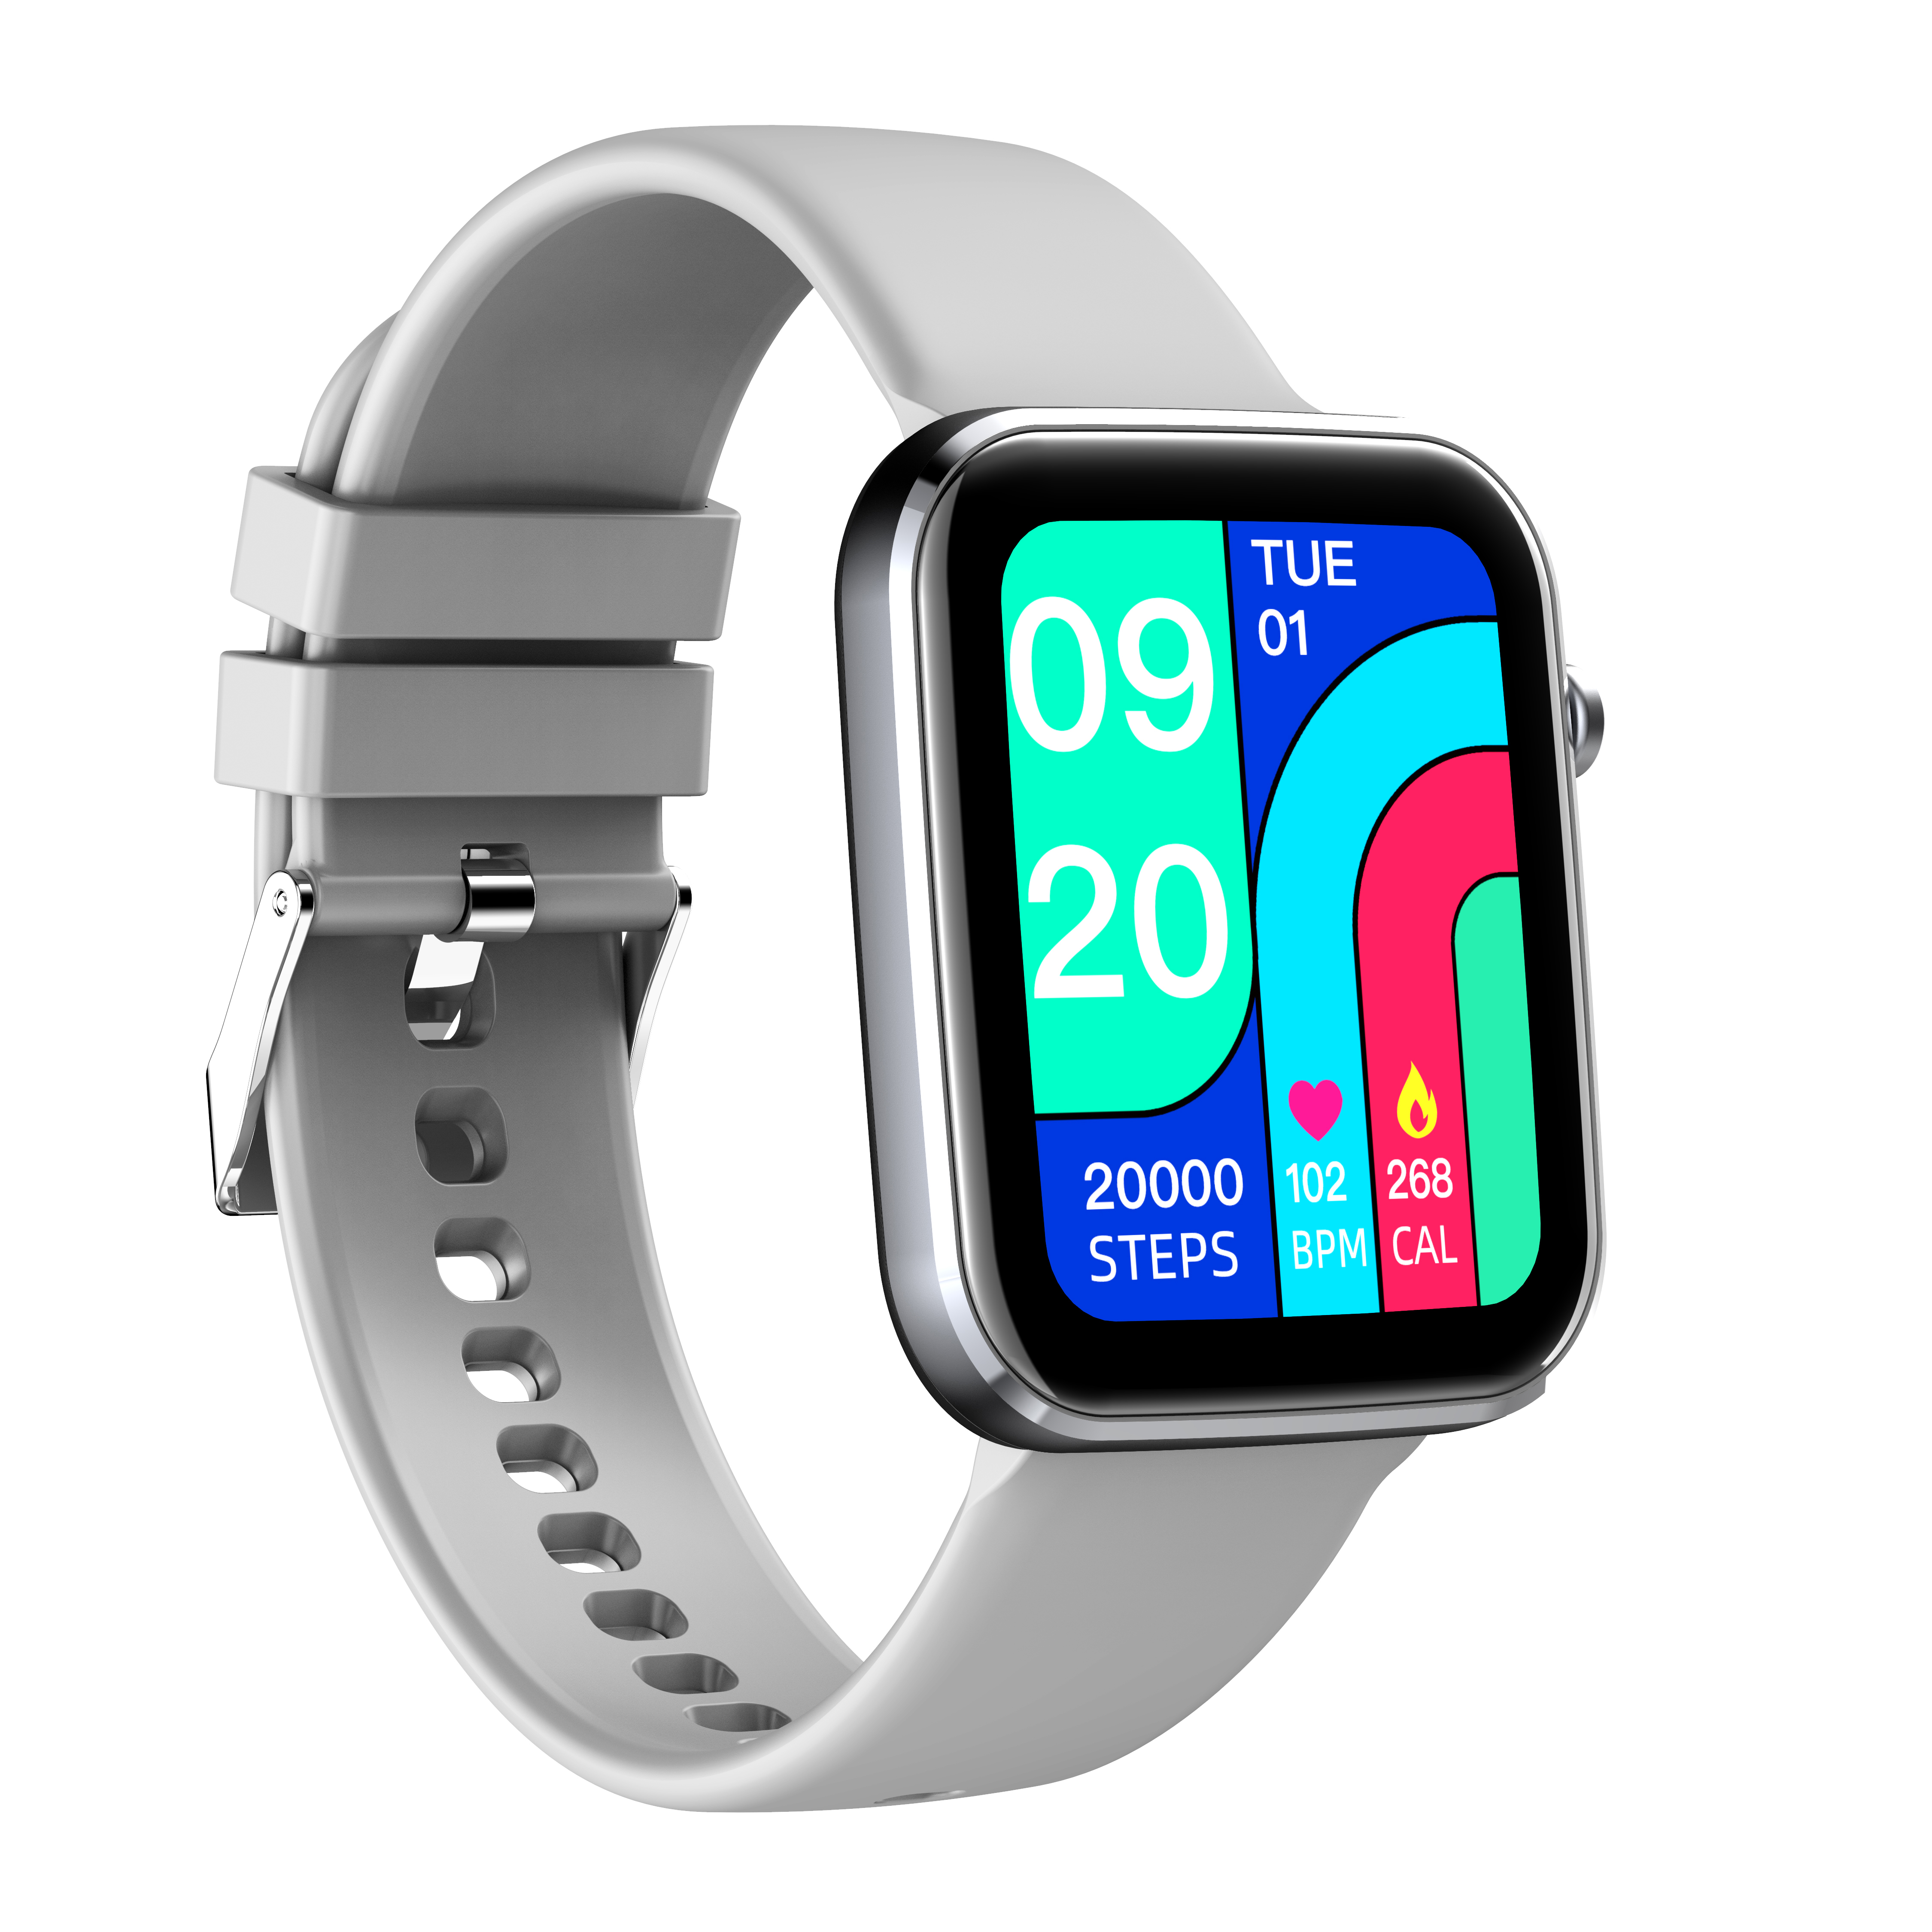 IP67 Full Touch High Quality Durable Personal Smart Sport Bracelet with Heart Rate Spo2 Z15